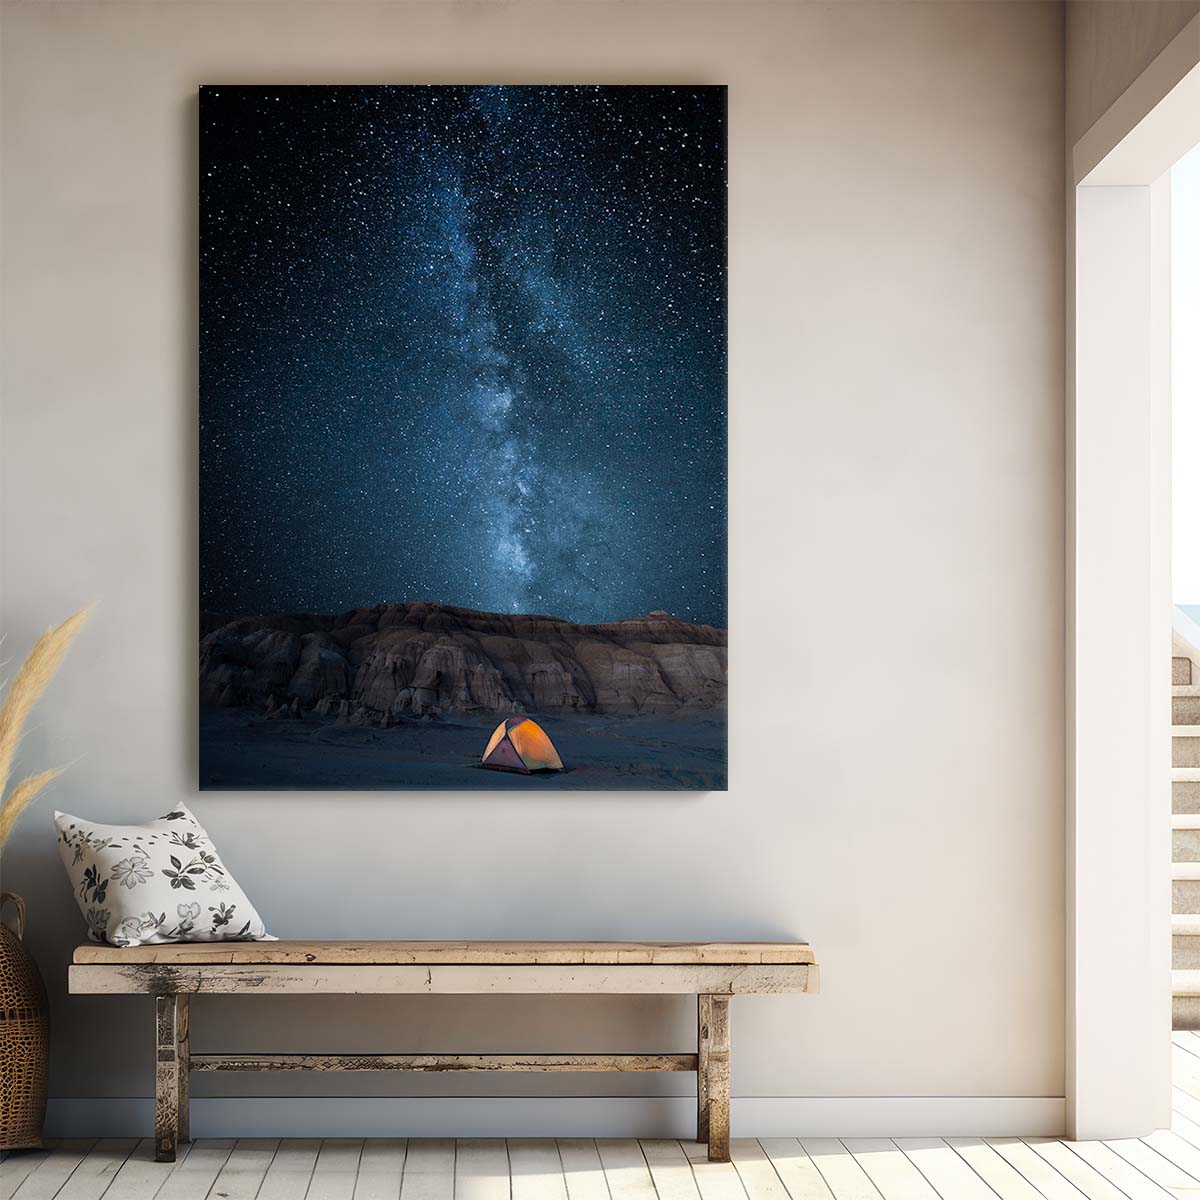 Starry Night Sky Camping Adventure Photography, Bisti, New Mexico by Luxuriance Designs, made in USA